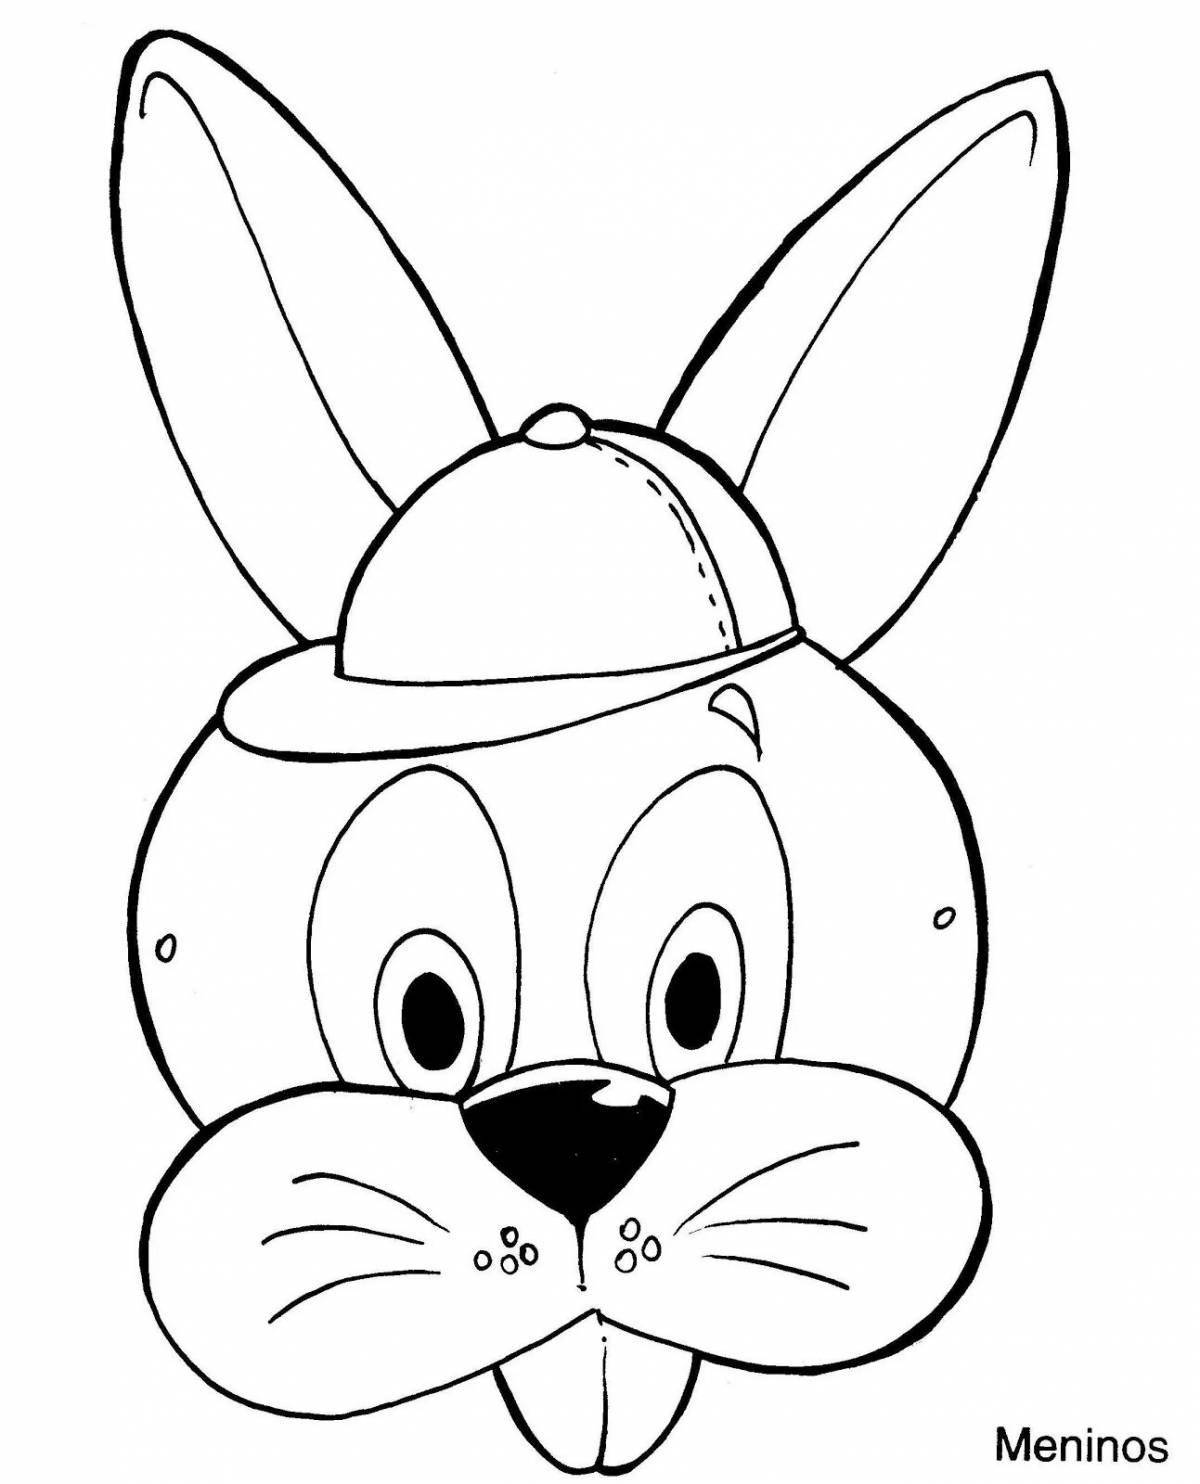 Furry bunny mask coloring book